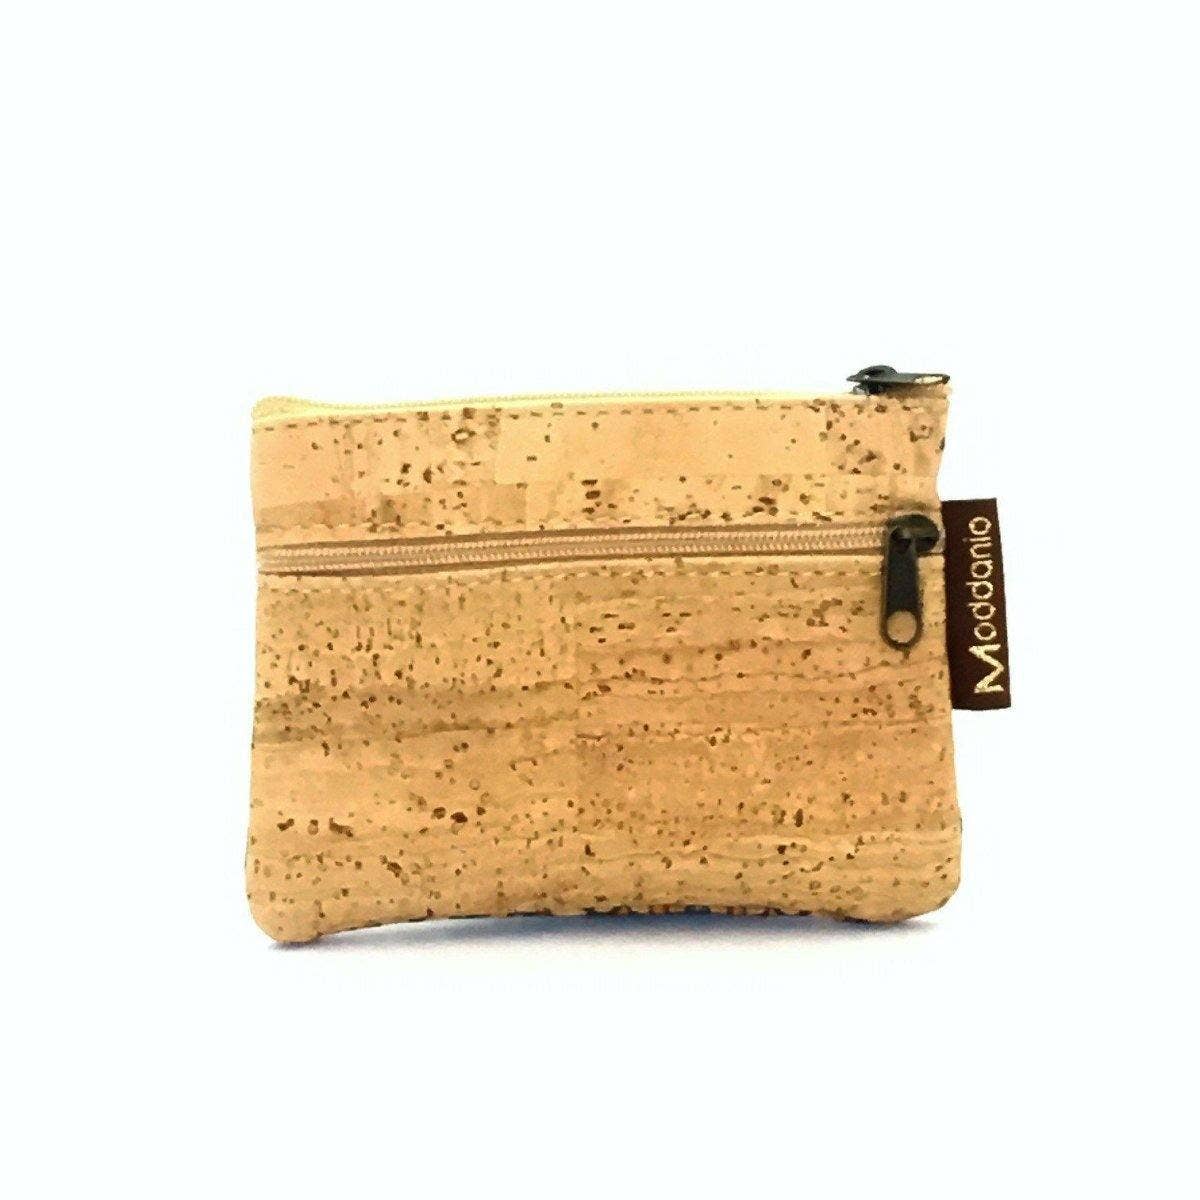 Cork Coin Purse and Vegan Change Pouch in blue and deep orange pattern